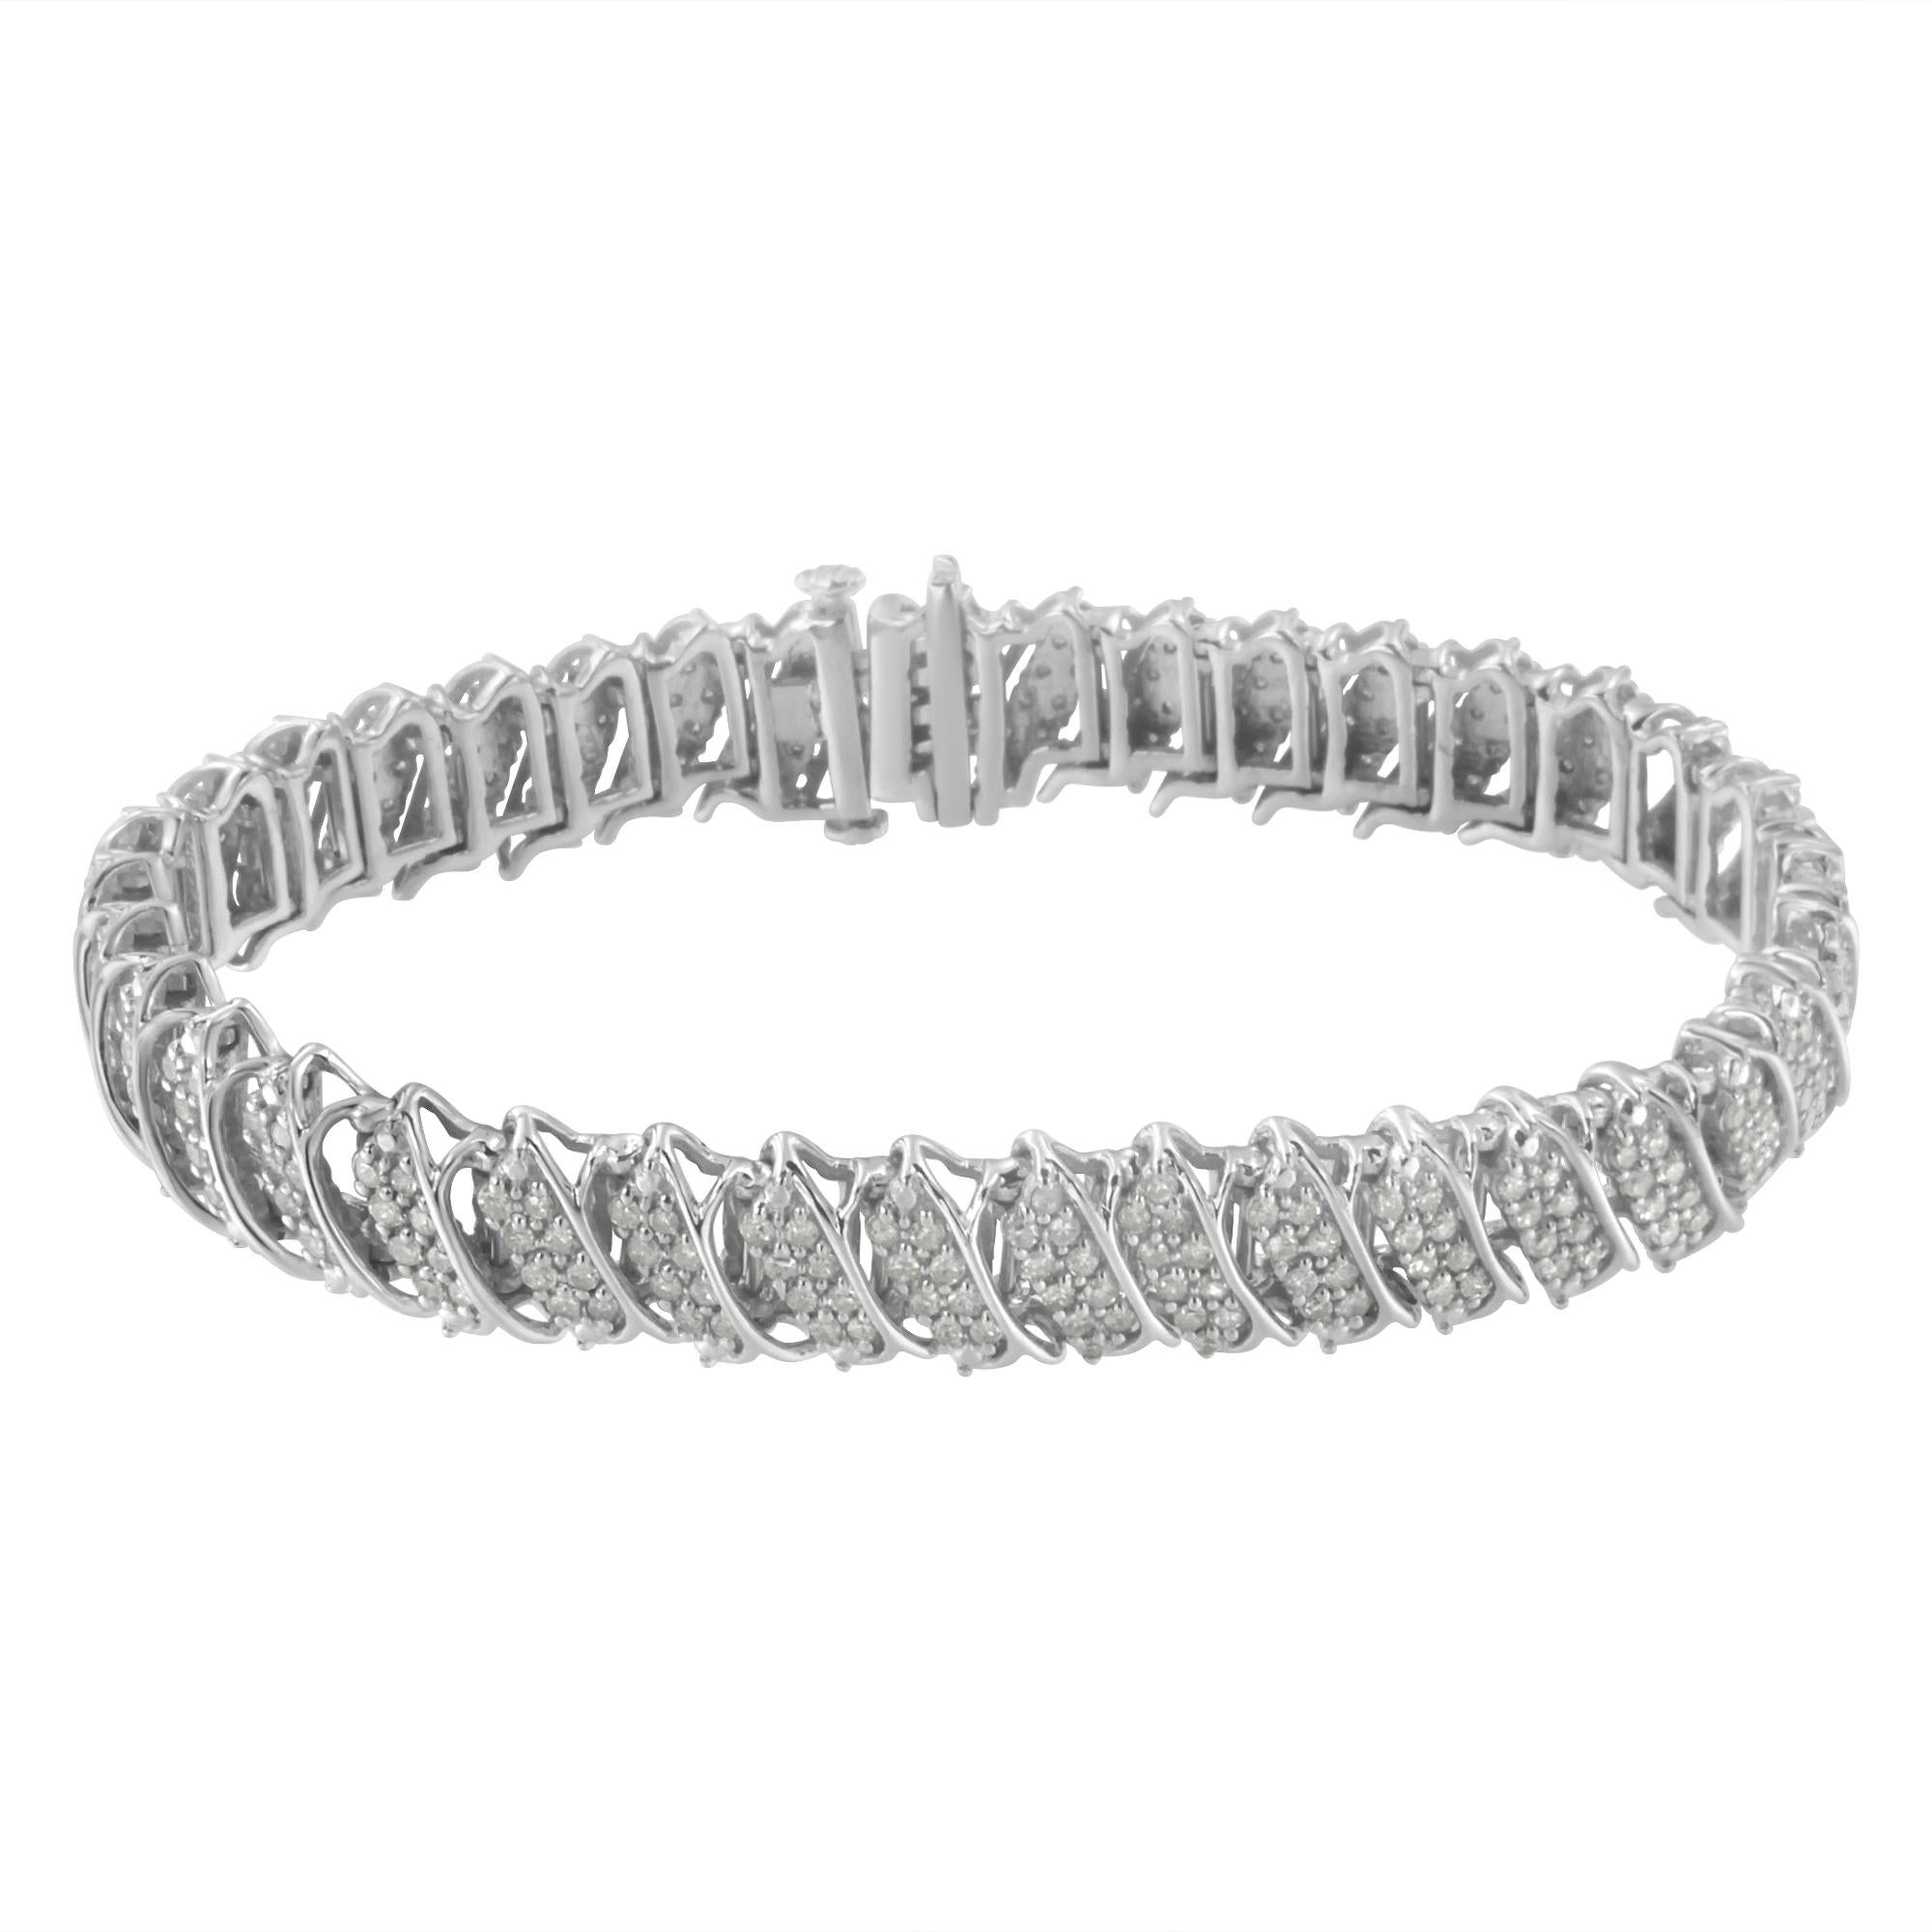 Elegant and timeless, this luxe tennis bracelet features a stunning 3.0 carat total weight of round pave set diamonds with 300 individual stones. Each link of this bracelet has two diagonal rows of pave set stones inside the curve of a protective